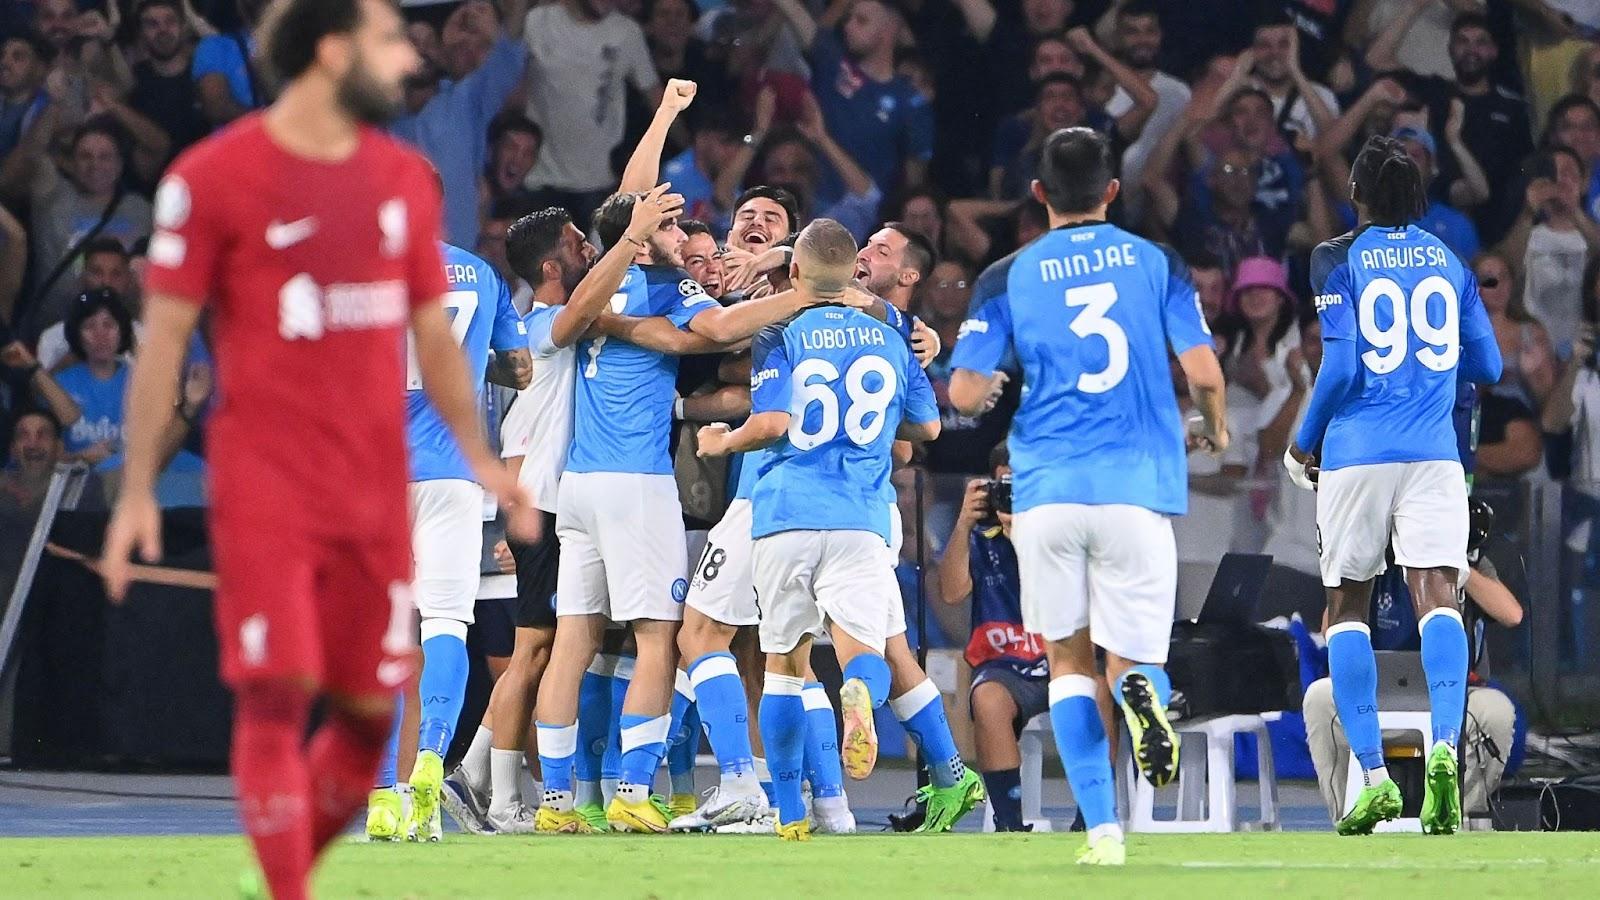 Napoli thrashed Liverpool 4-1 last week in the UCL clash